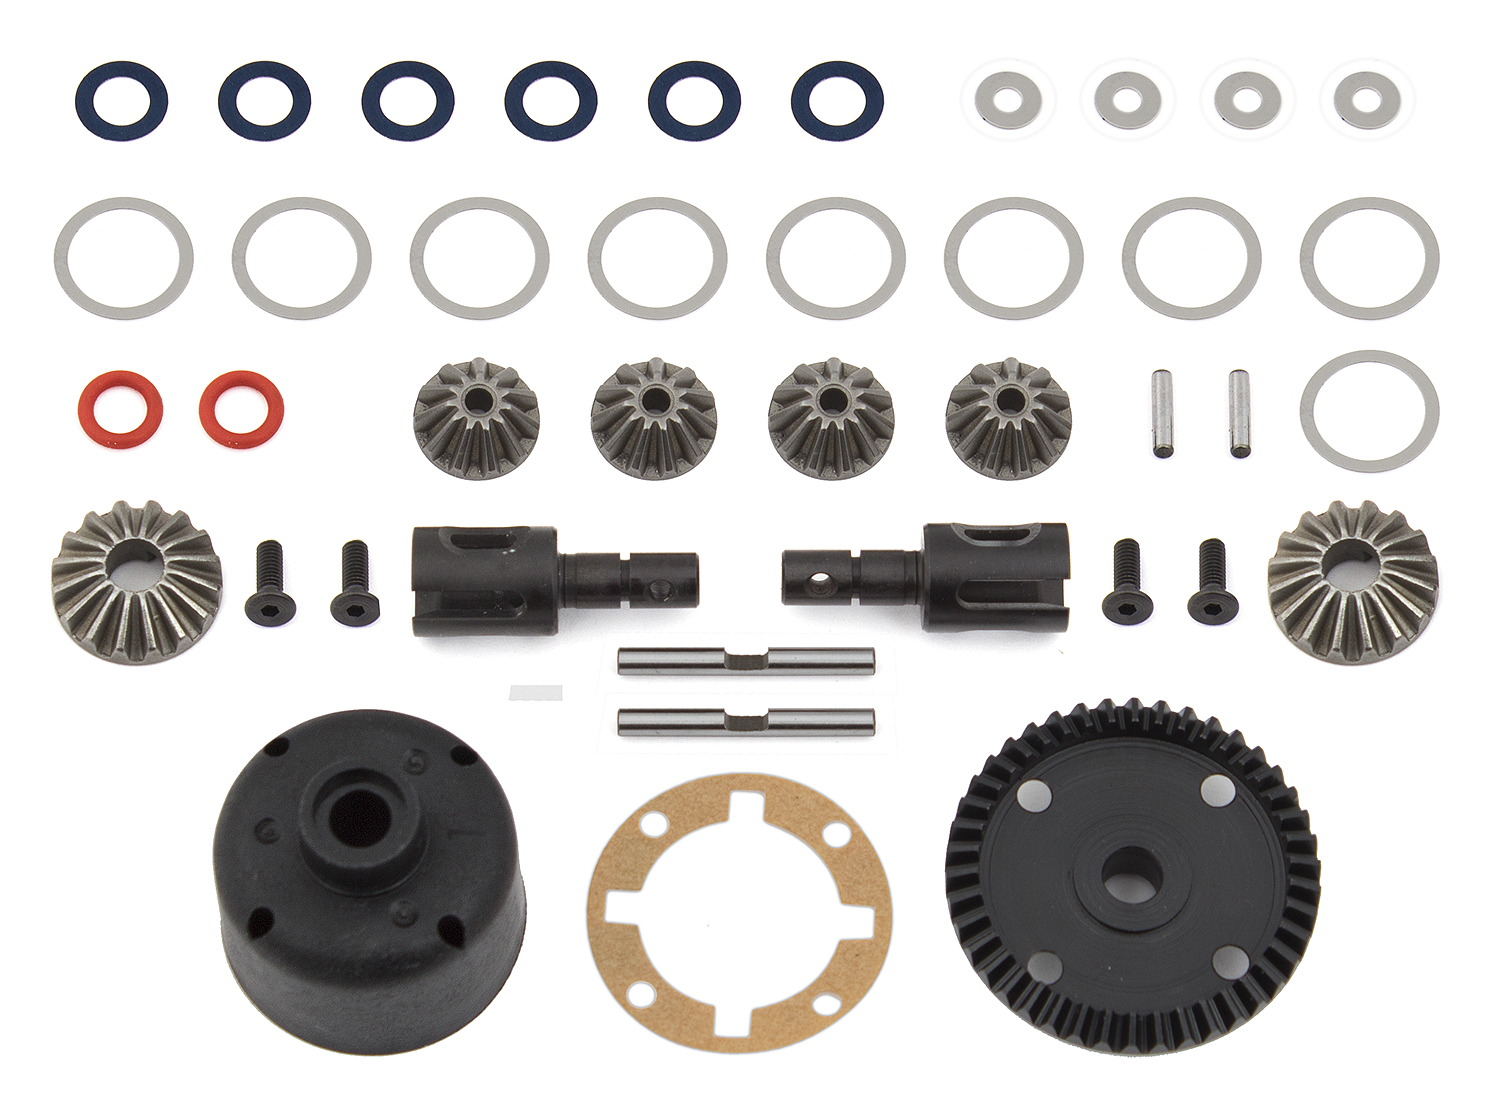 B64 Gear Diff Kit, front and rear | Associated Electrics